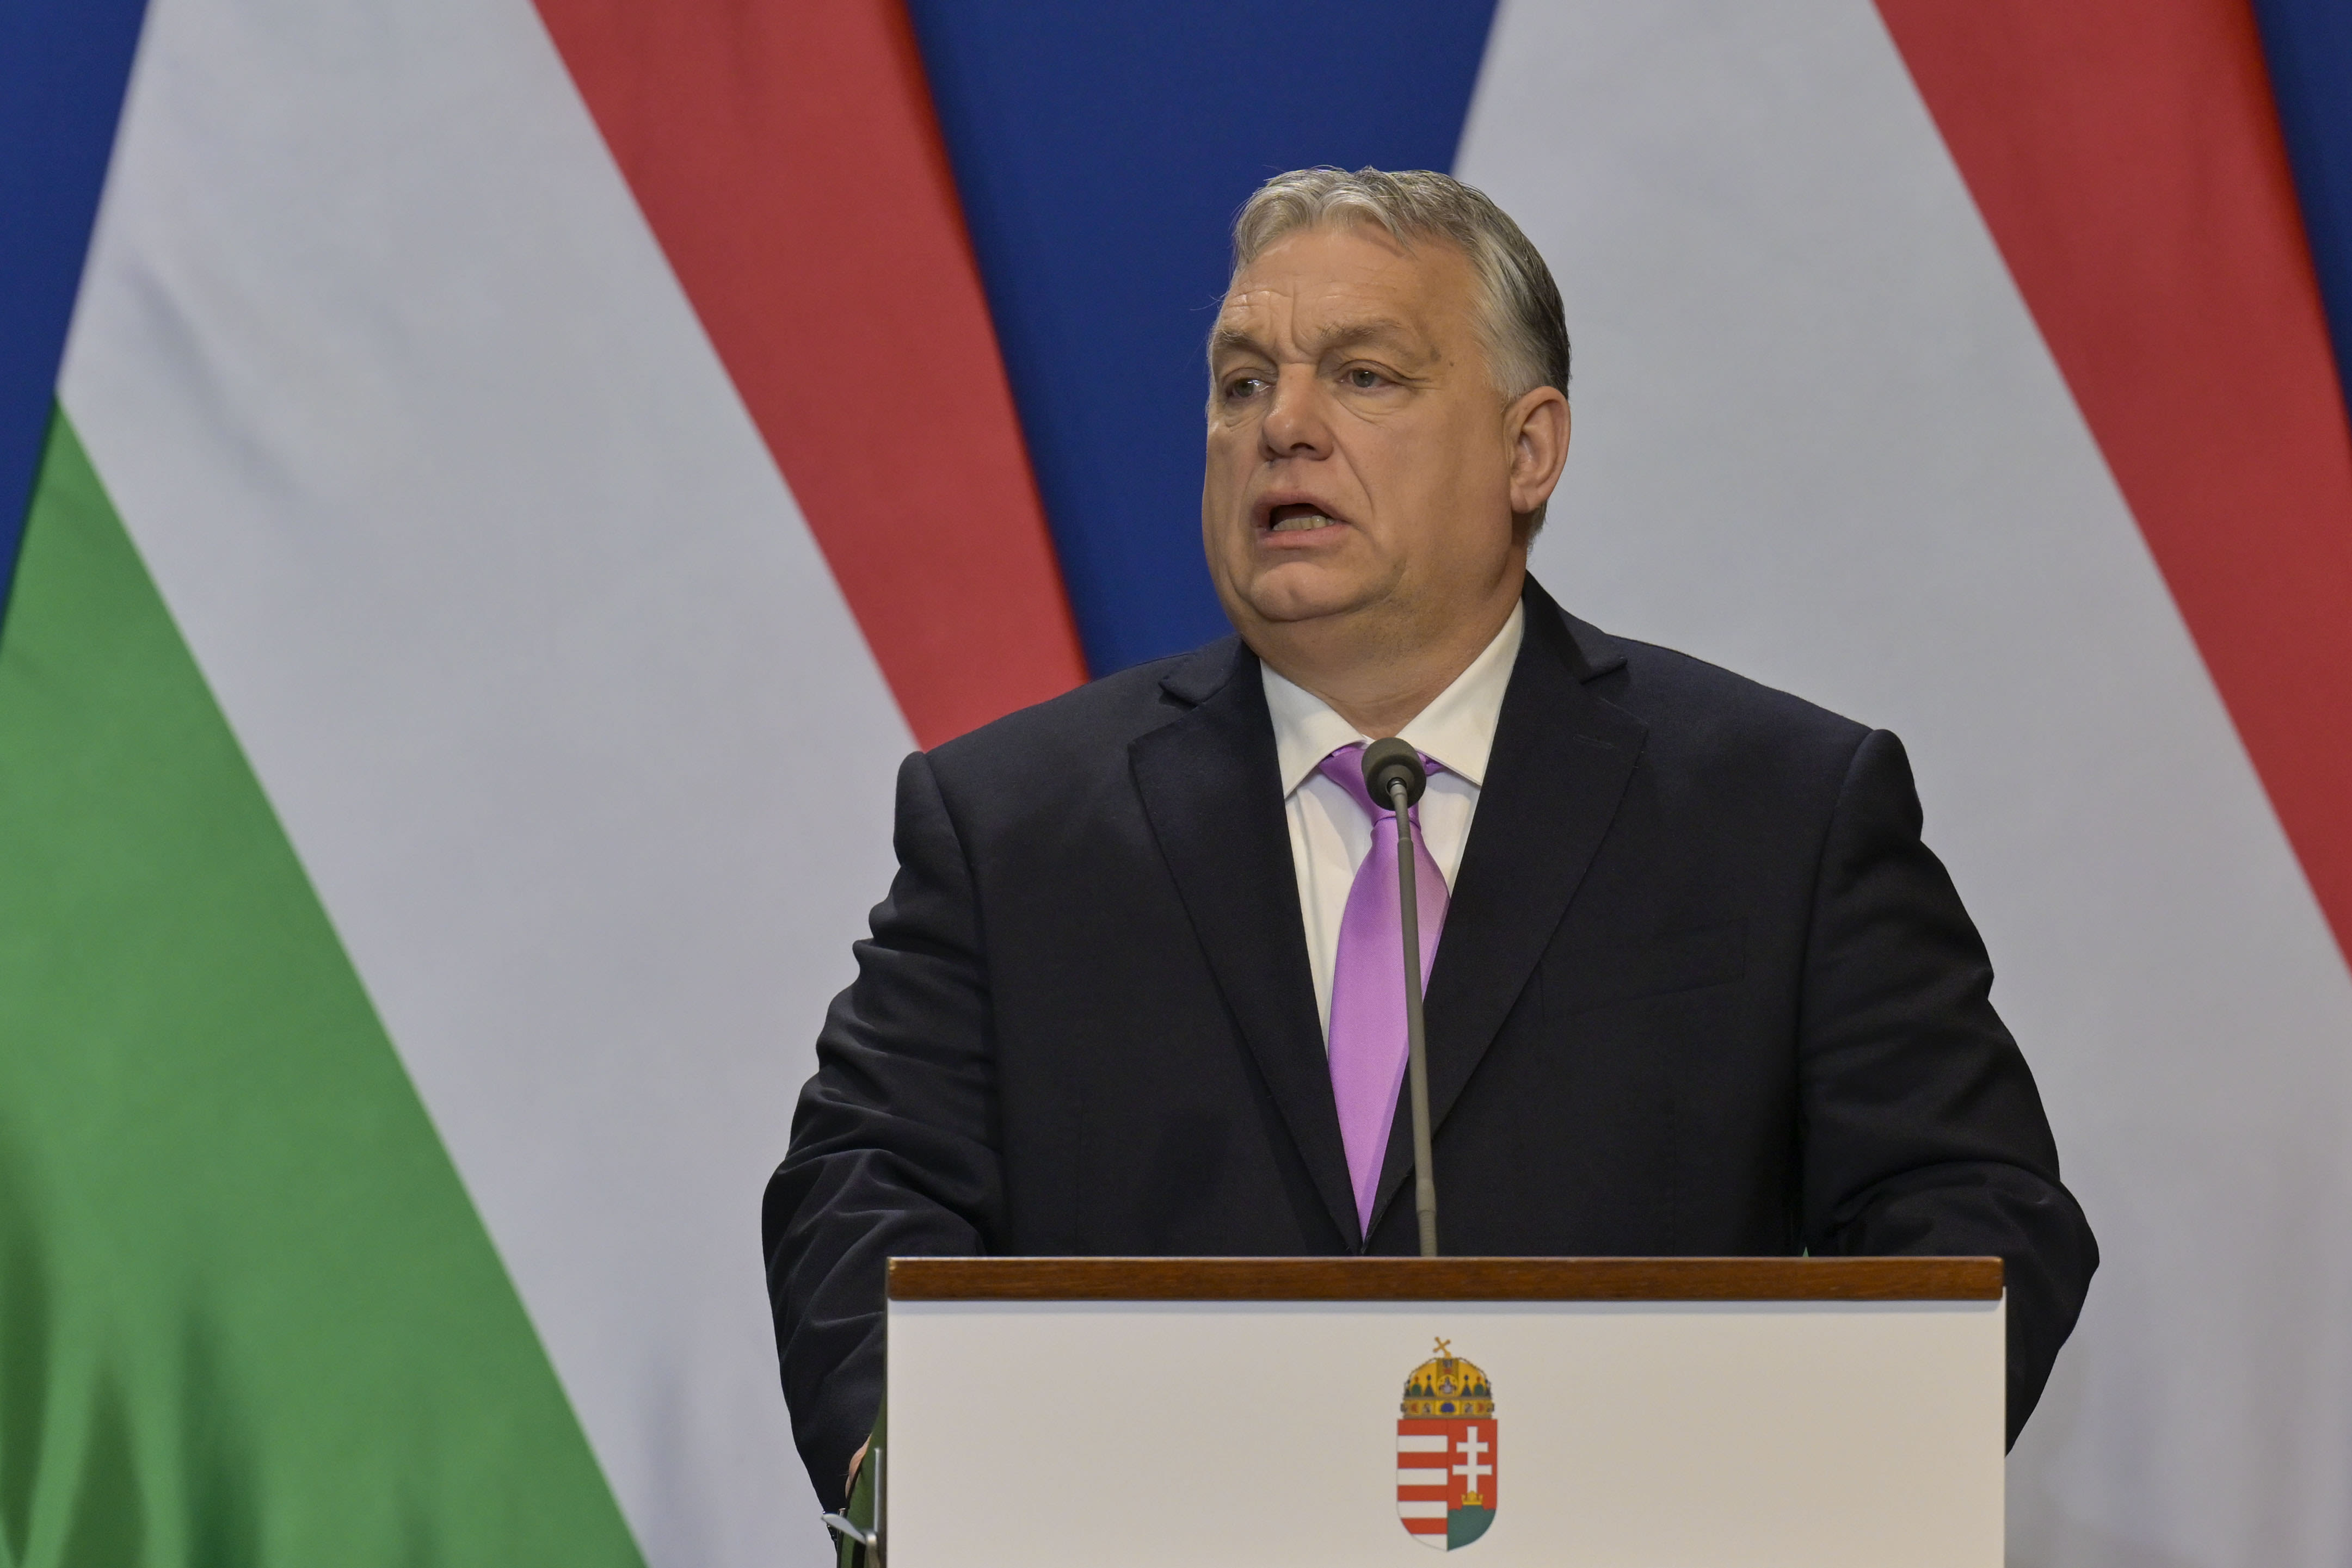 Hungary's Orbán pushes back on EU and NATO proposals to further assist Ukraine